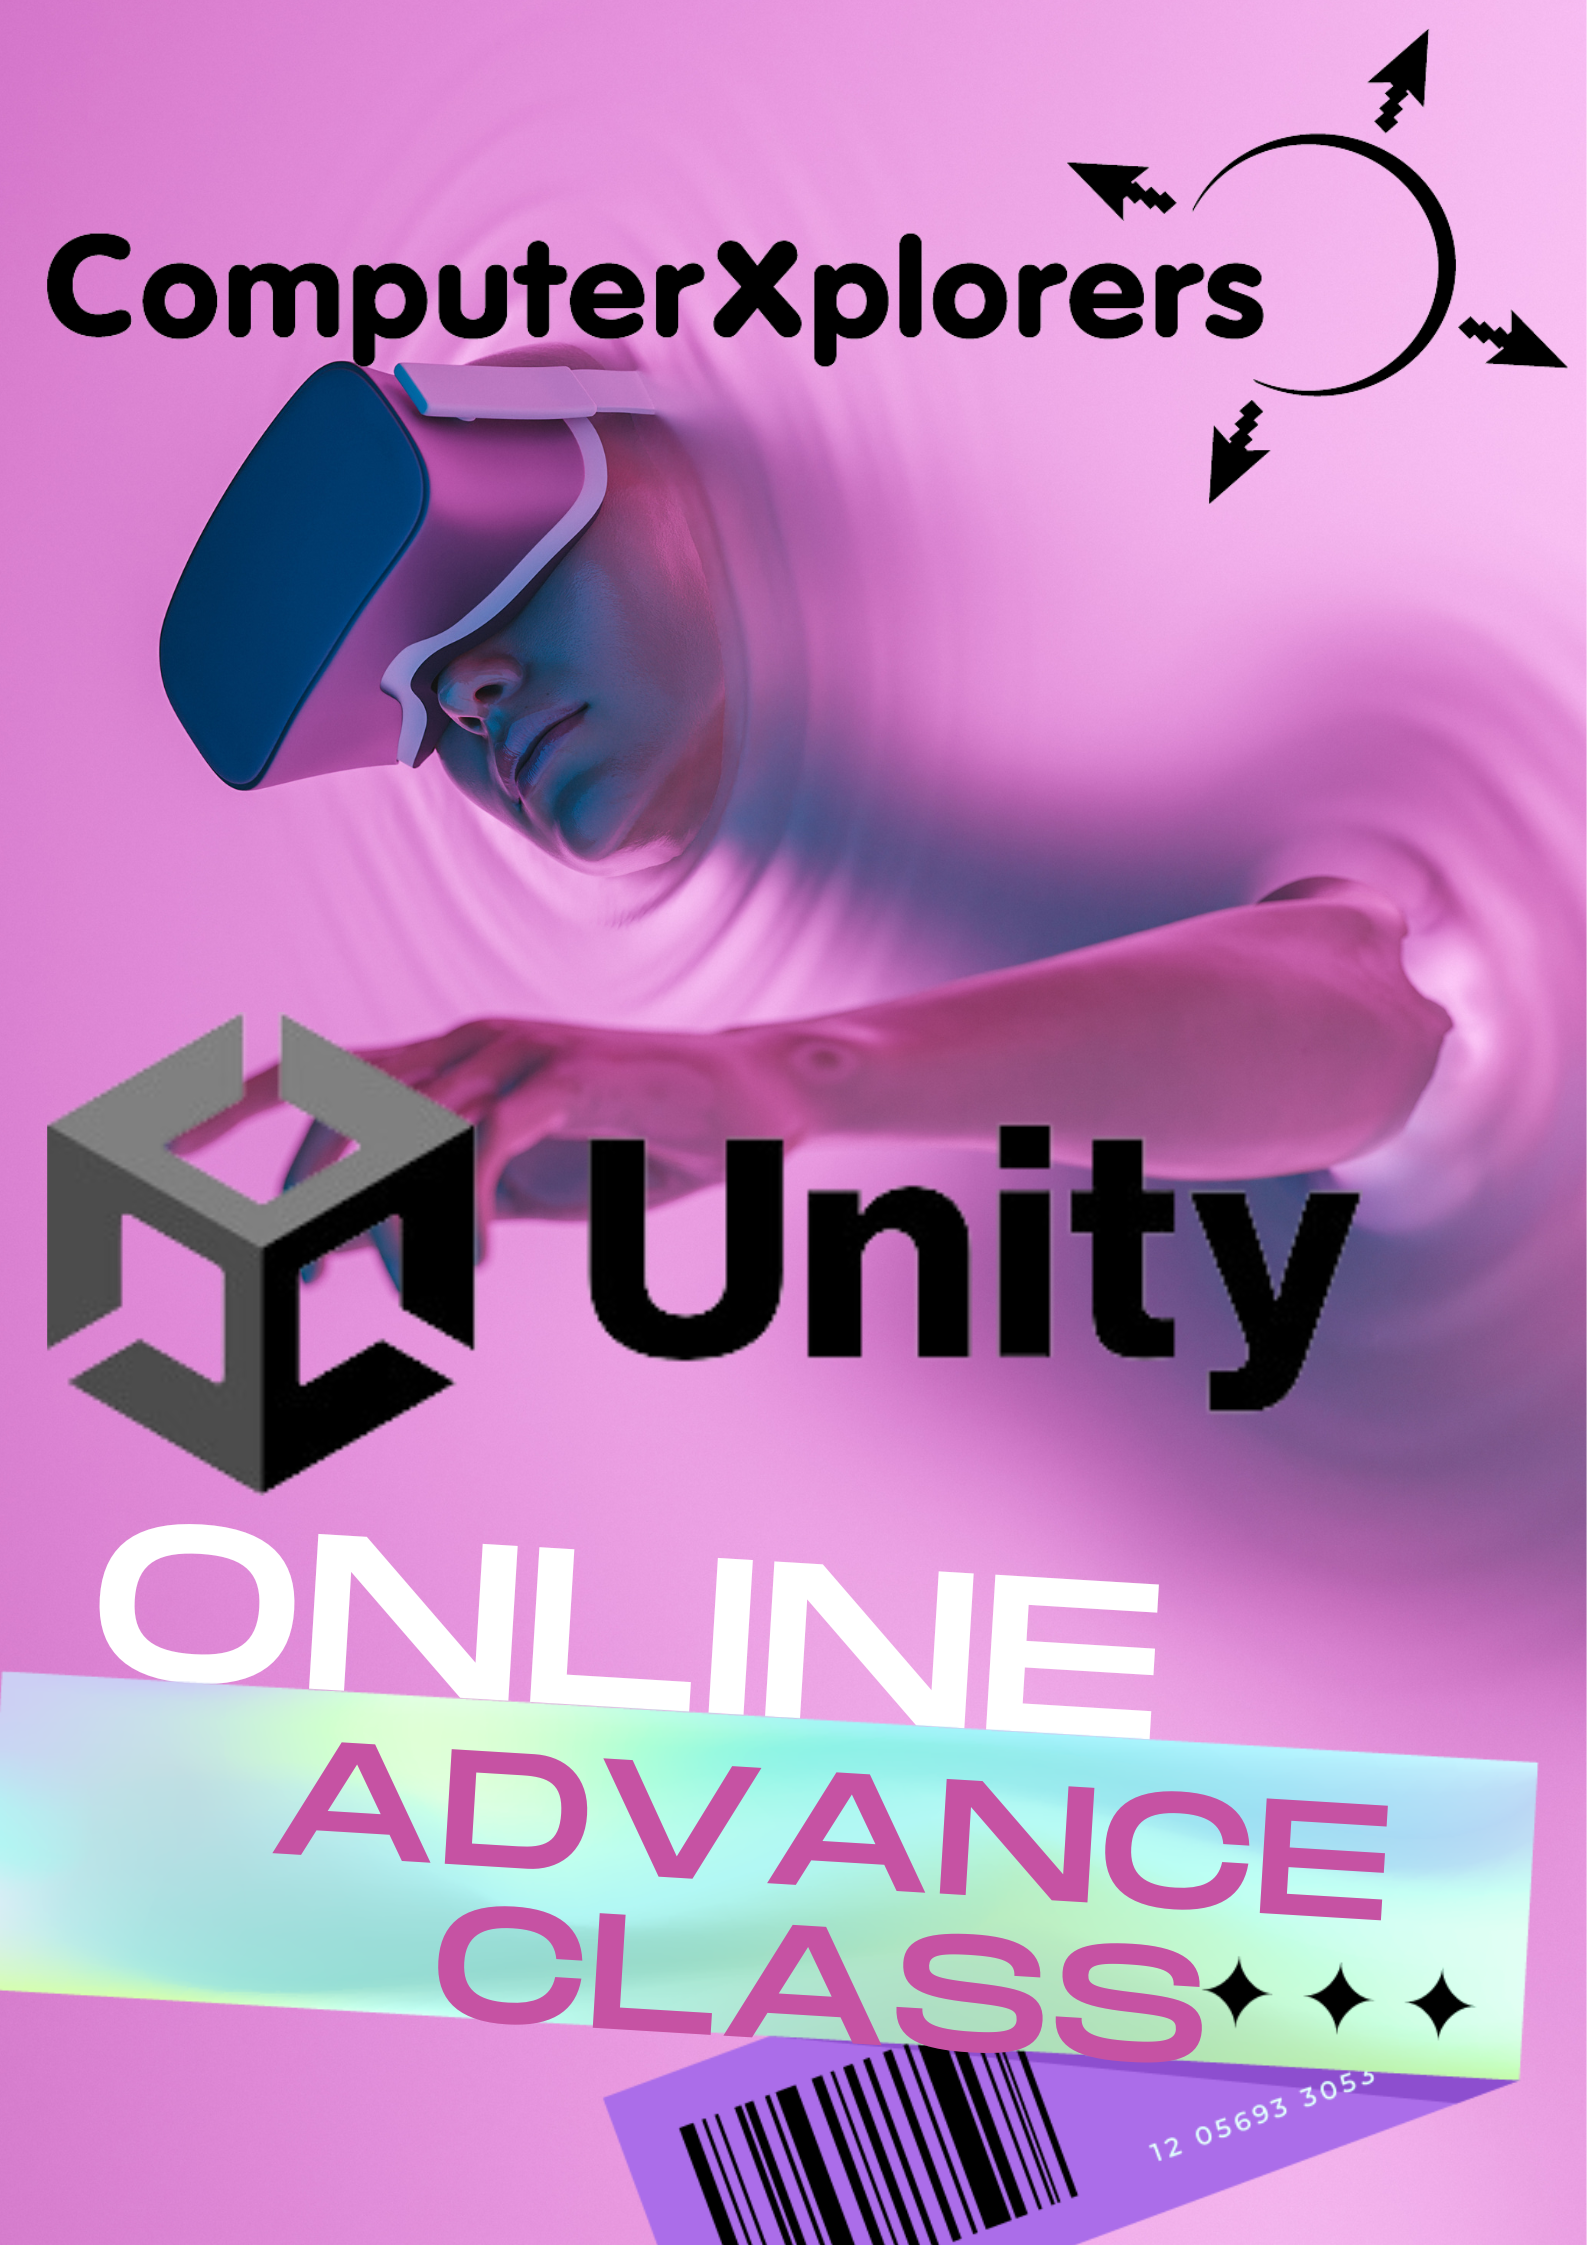 Online Computing classes UK wide – Advance class using Unity and C#